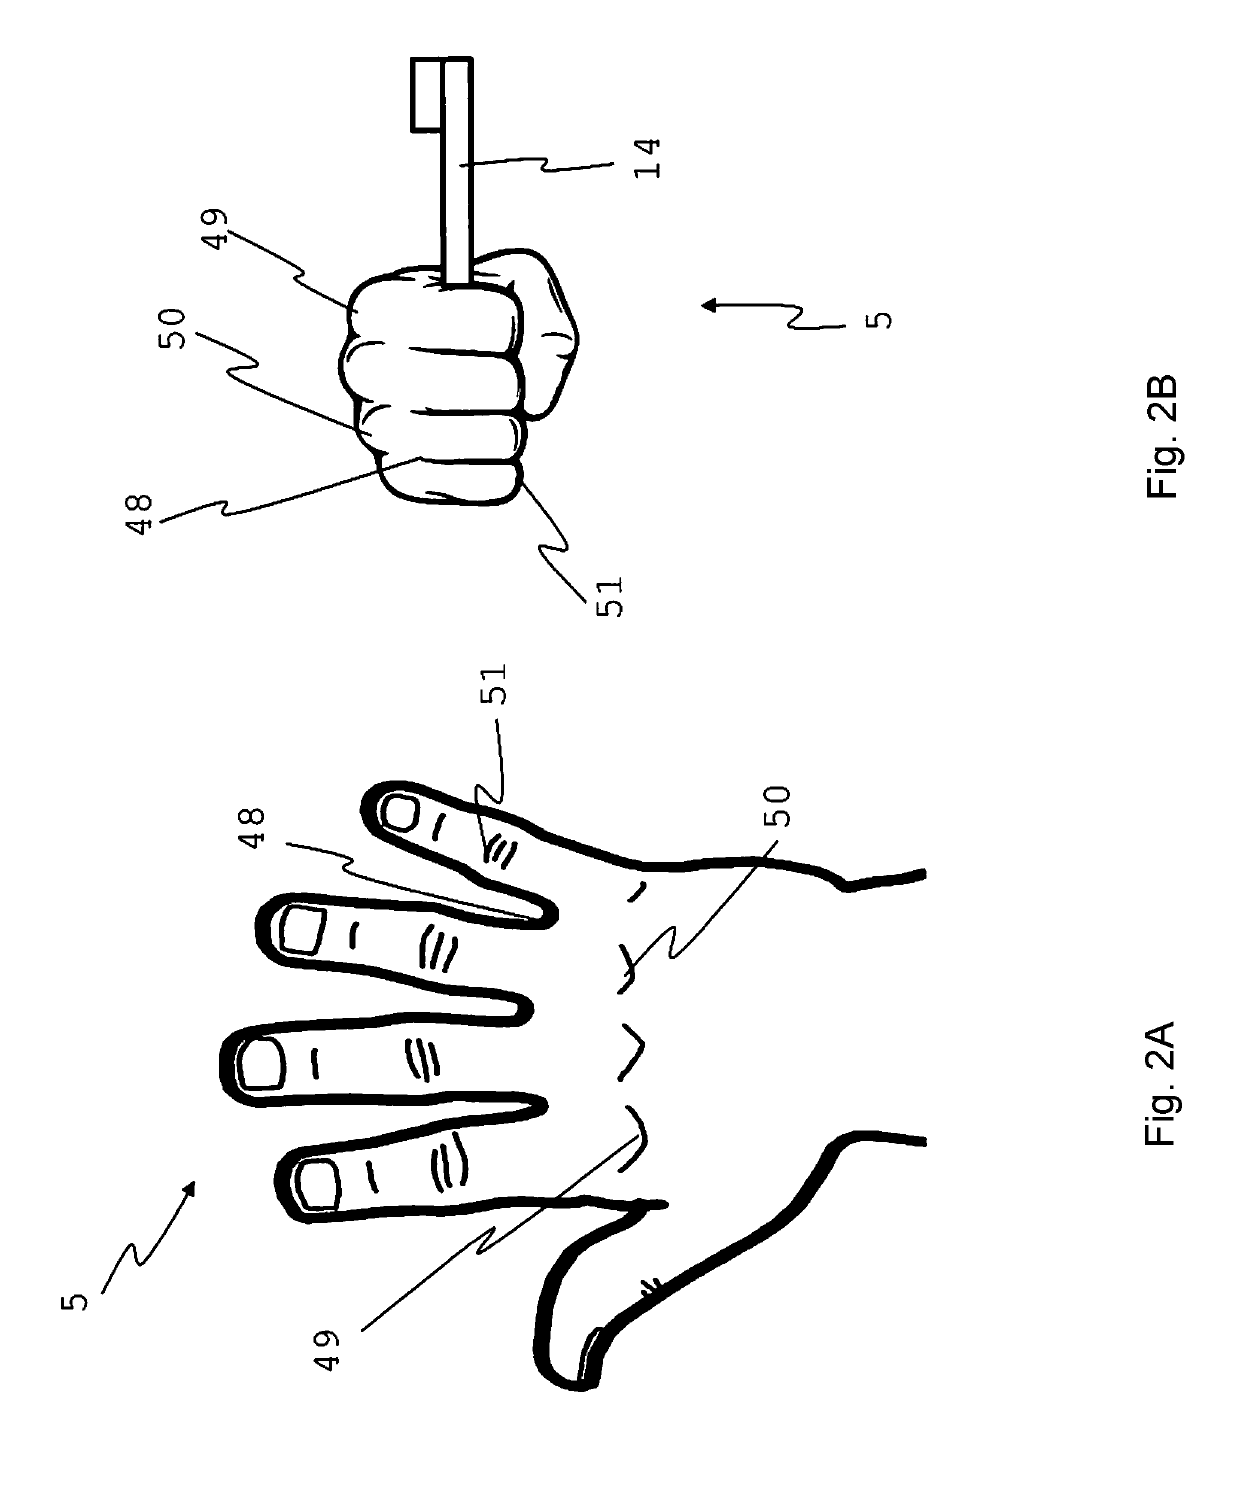 Method for determining movement patterns during a dental treatment